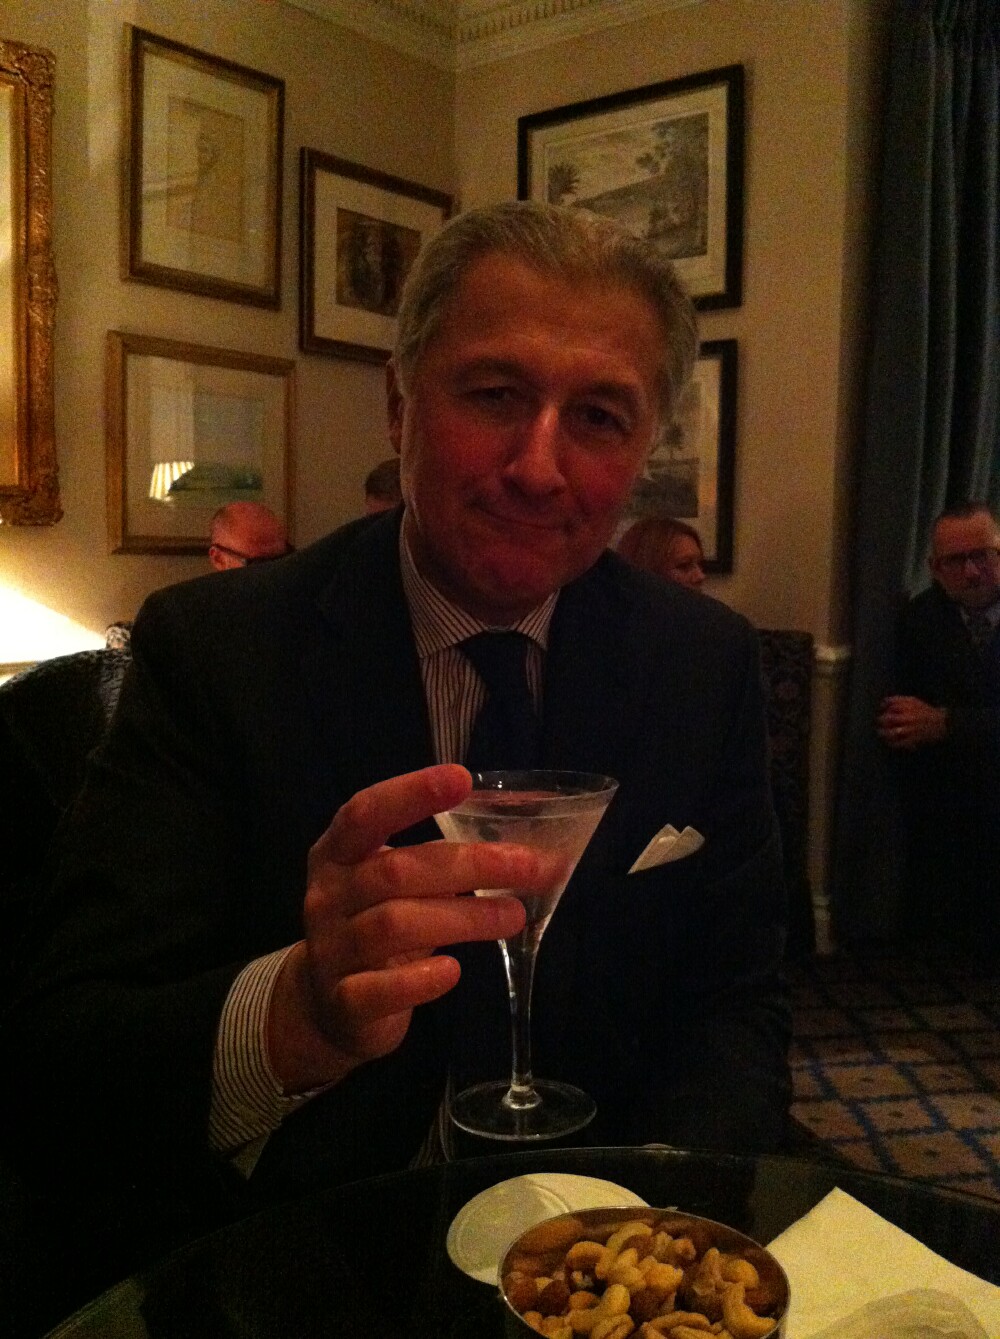 Alessandro Palazzi mixing a superb Martini cocktail at the Dukes in London